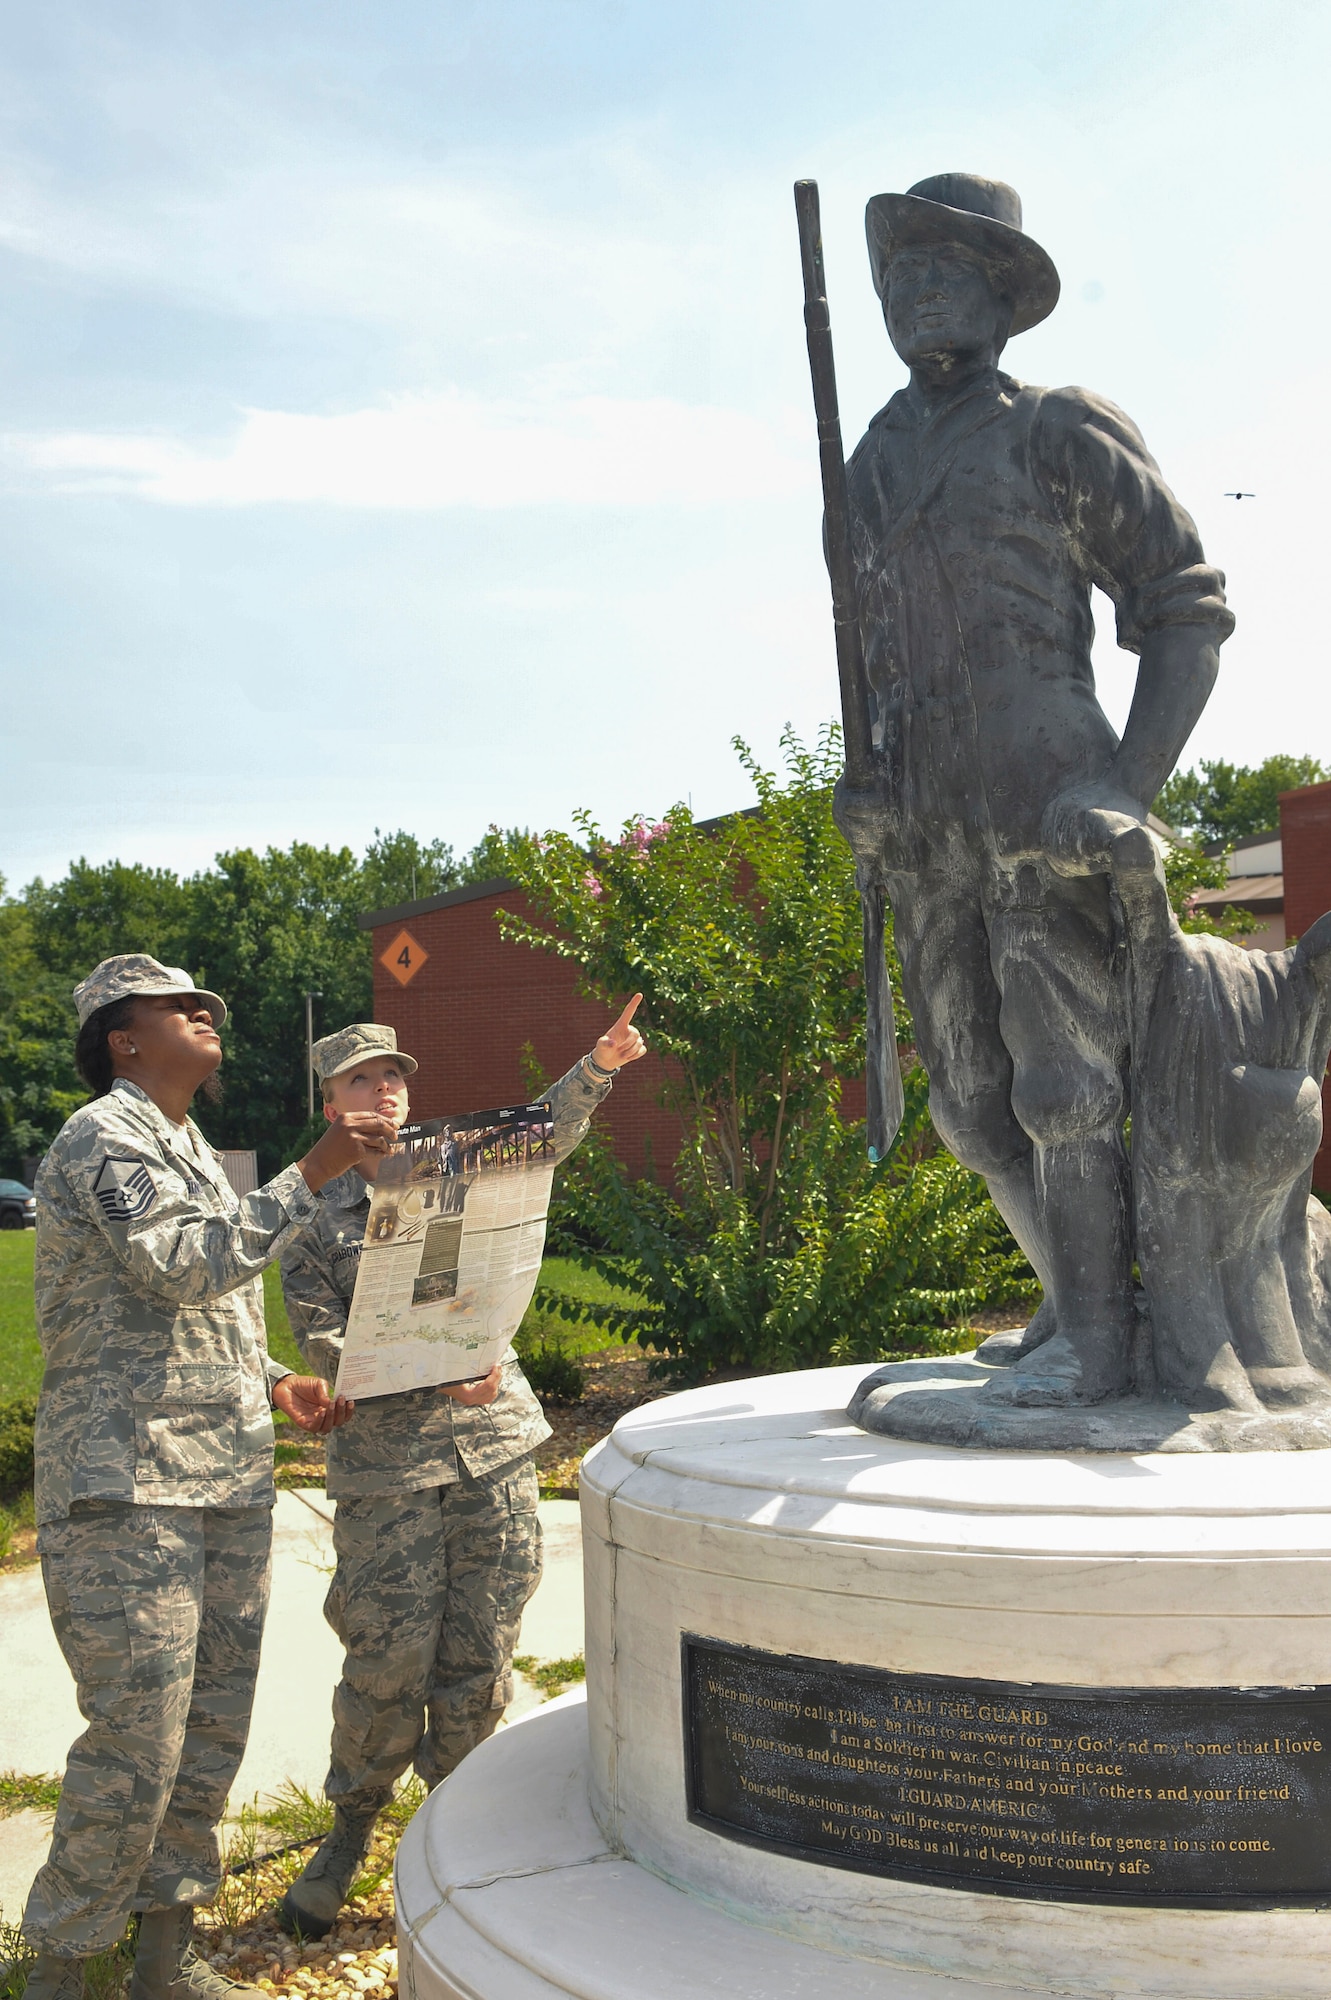 From right, Airman Samantha Grabowski and Master Sgt. Kathy Robinson, both members of the Air National Guard, refer to a brochure from the Minute Man National Historic Park as they look at the replica statue in front of the 116th Air Control Wing headquarters building. (U.S. Air Force photo by Misuzu Allen)